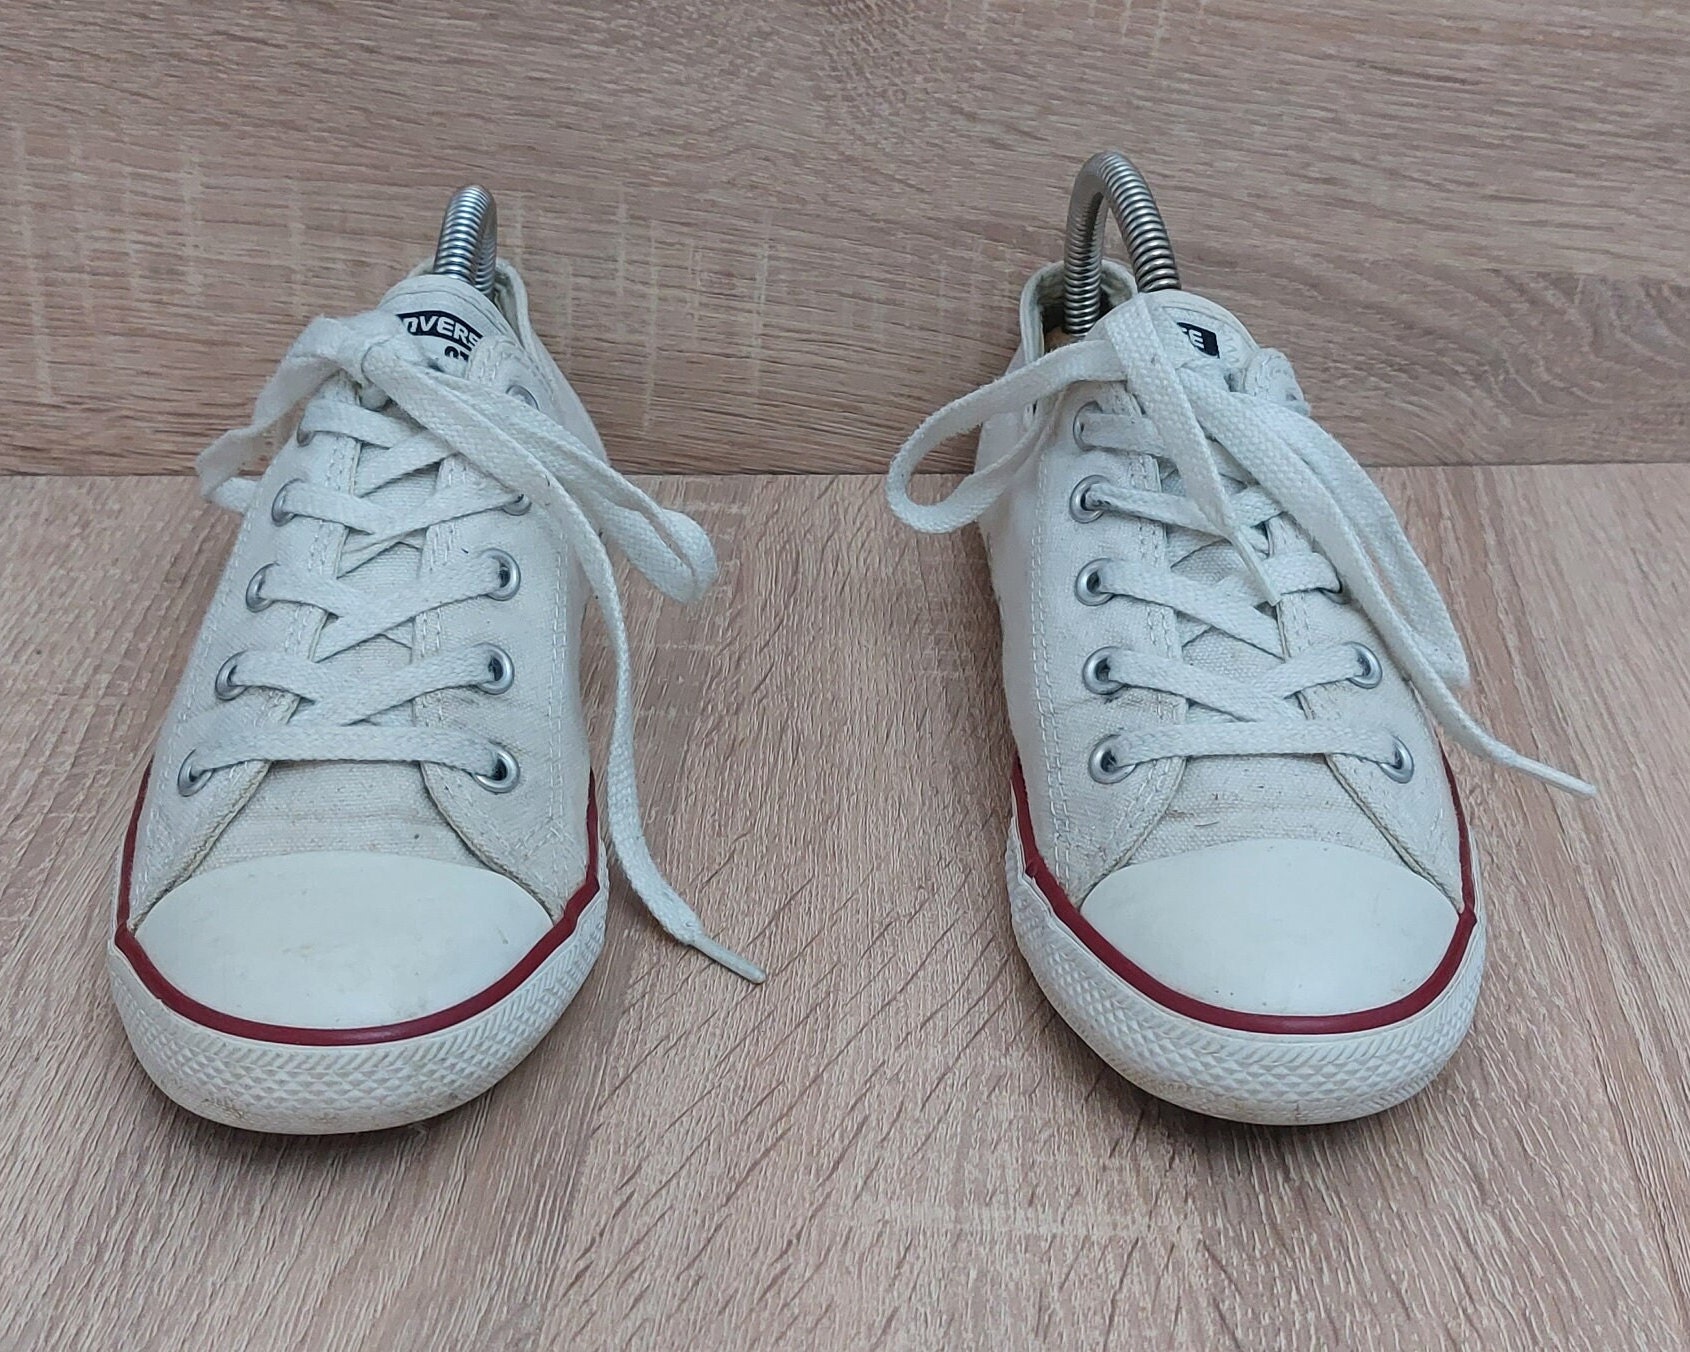 Vintage All-star Converse Sneakers Size: US 8 Etsy Hong Kong